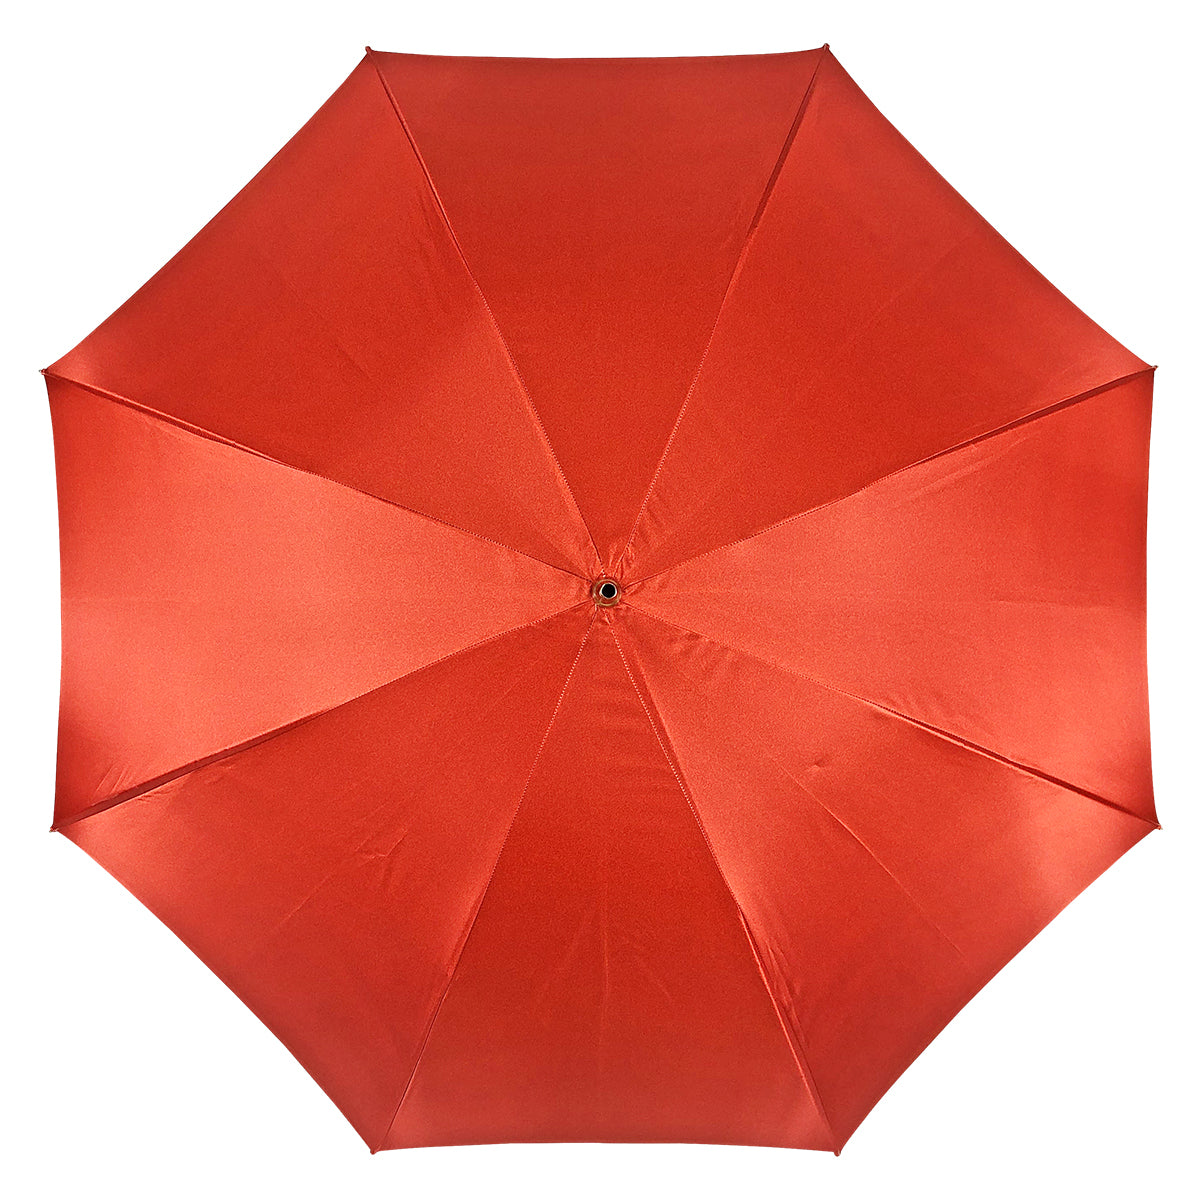 Fantastic red umbrella with Egyptian style